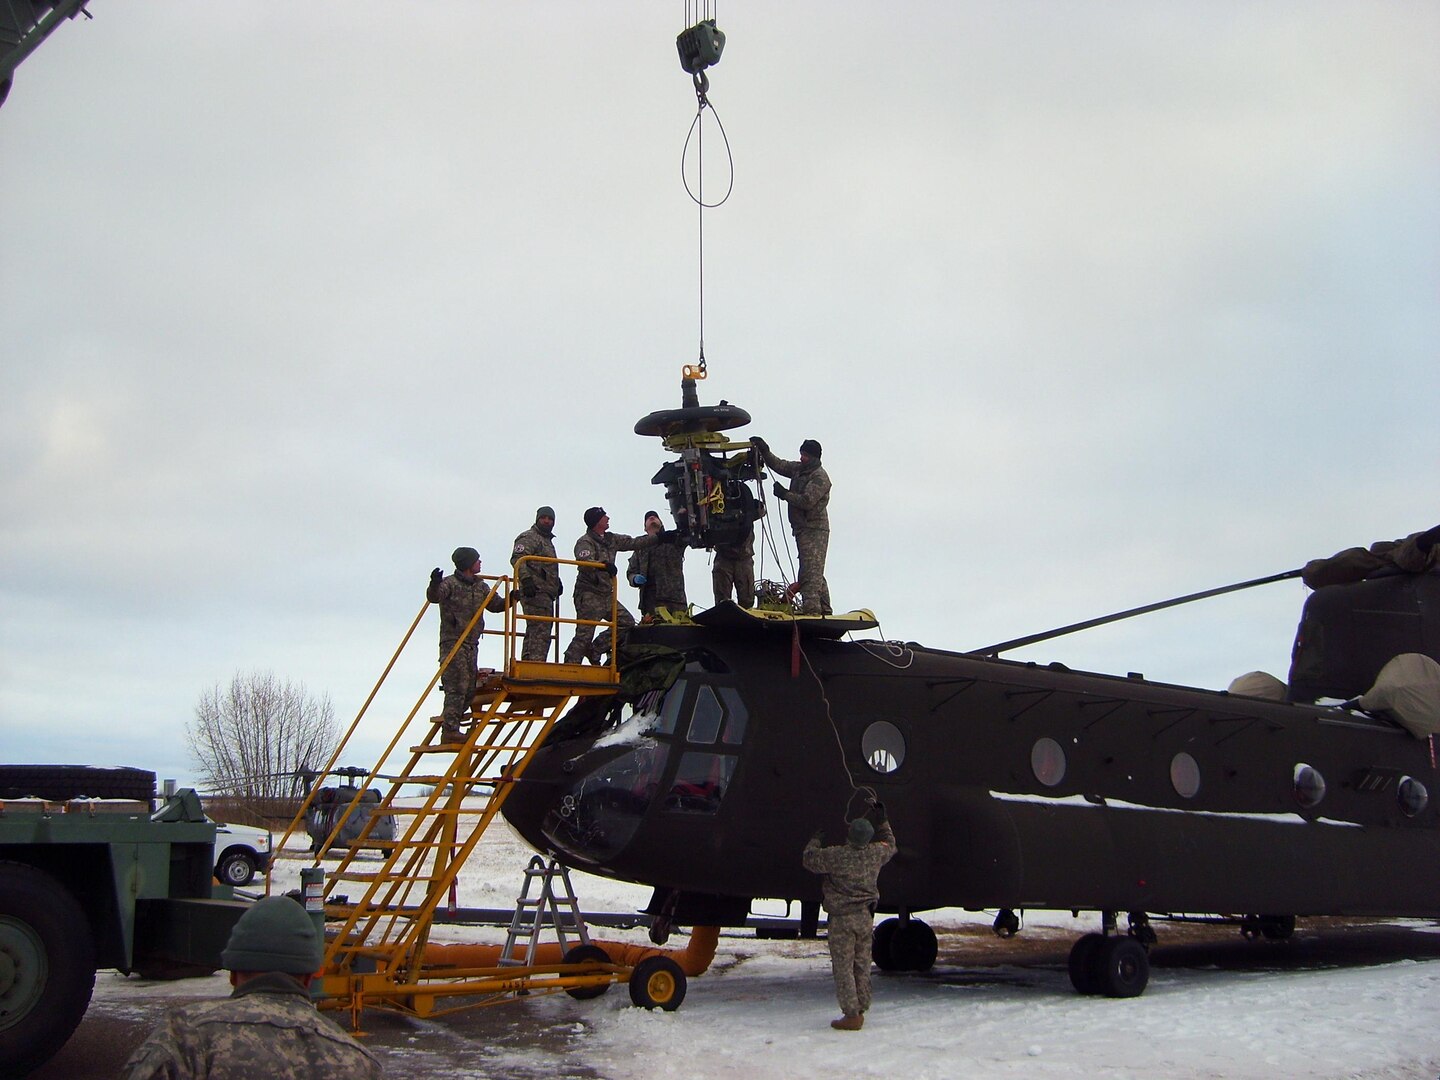 Colorado Army National Guard members replace a bad transmission in a CH-47 Chinook helicopter in below-freezing temperatures during operation Maple Resolve at the Canadian Manoeuver Training Center in Wainwright, Alberta Oct. 24, 2012.